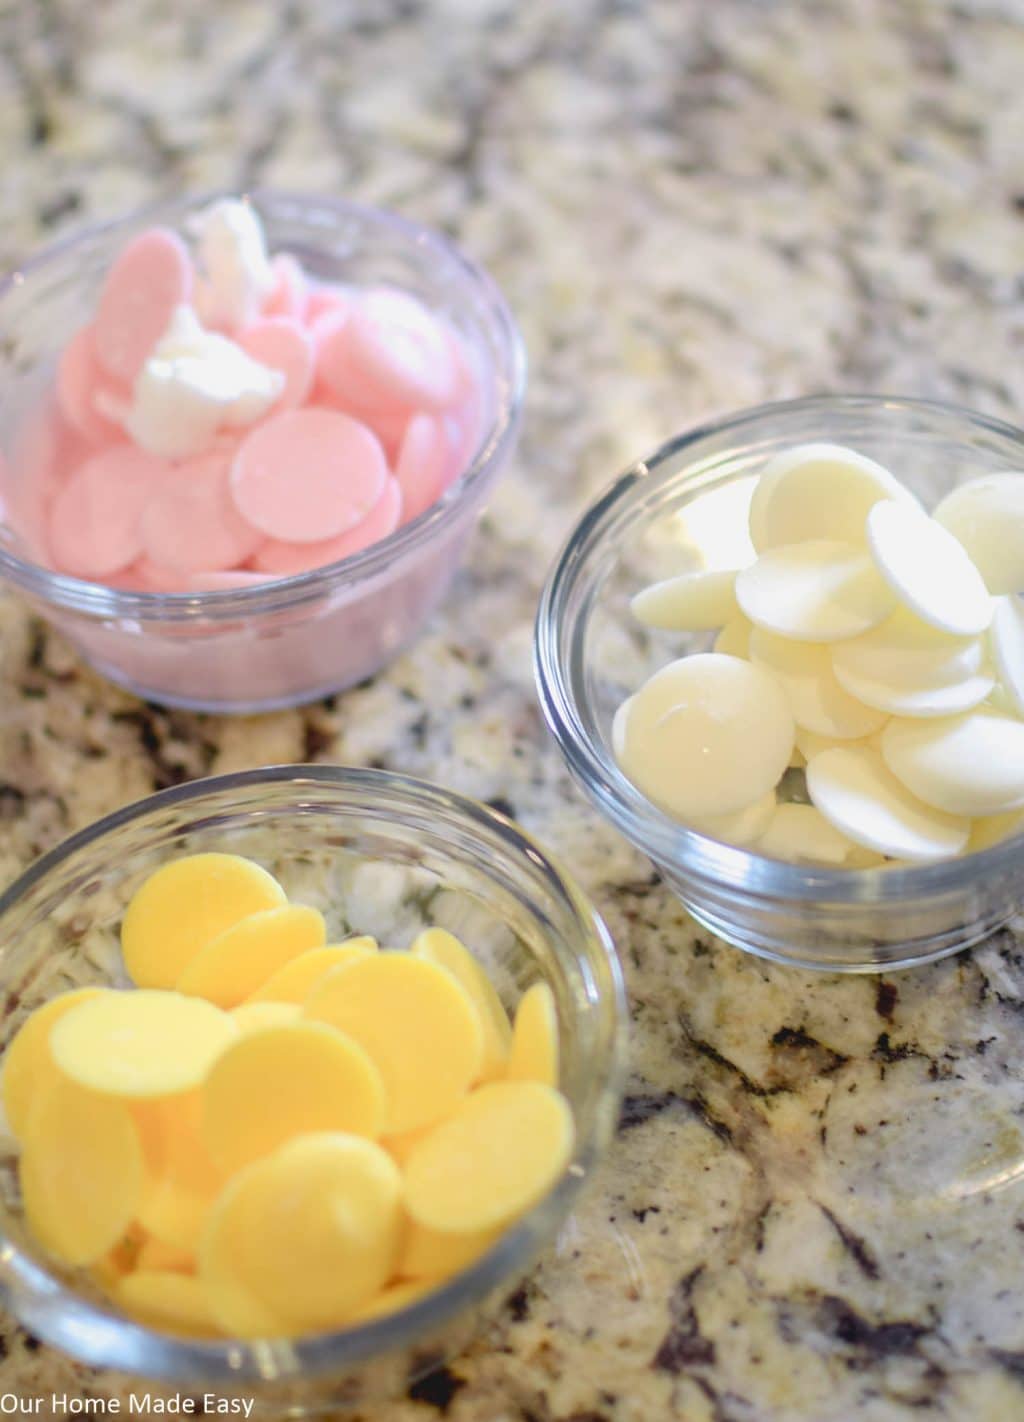 Melt your white chocolate candy melts with a little bit of coconut oil or crisco